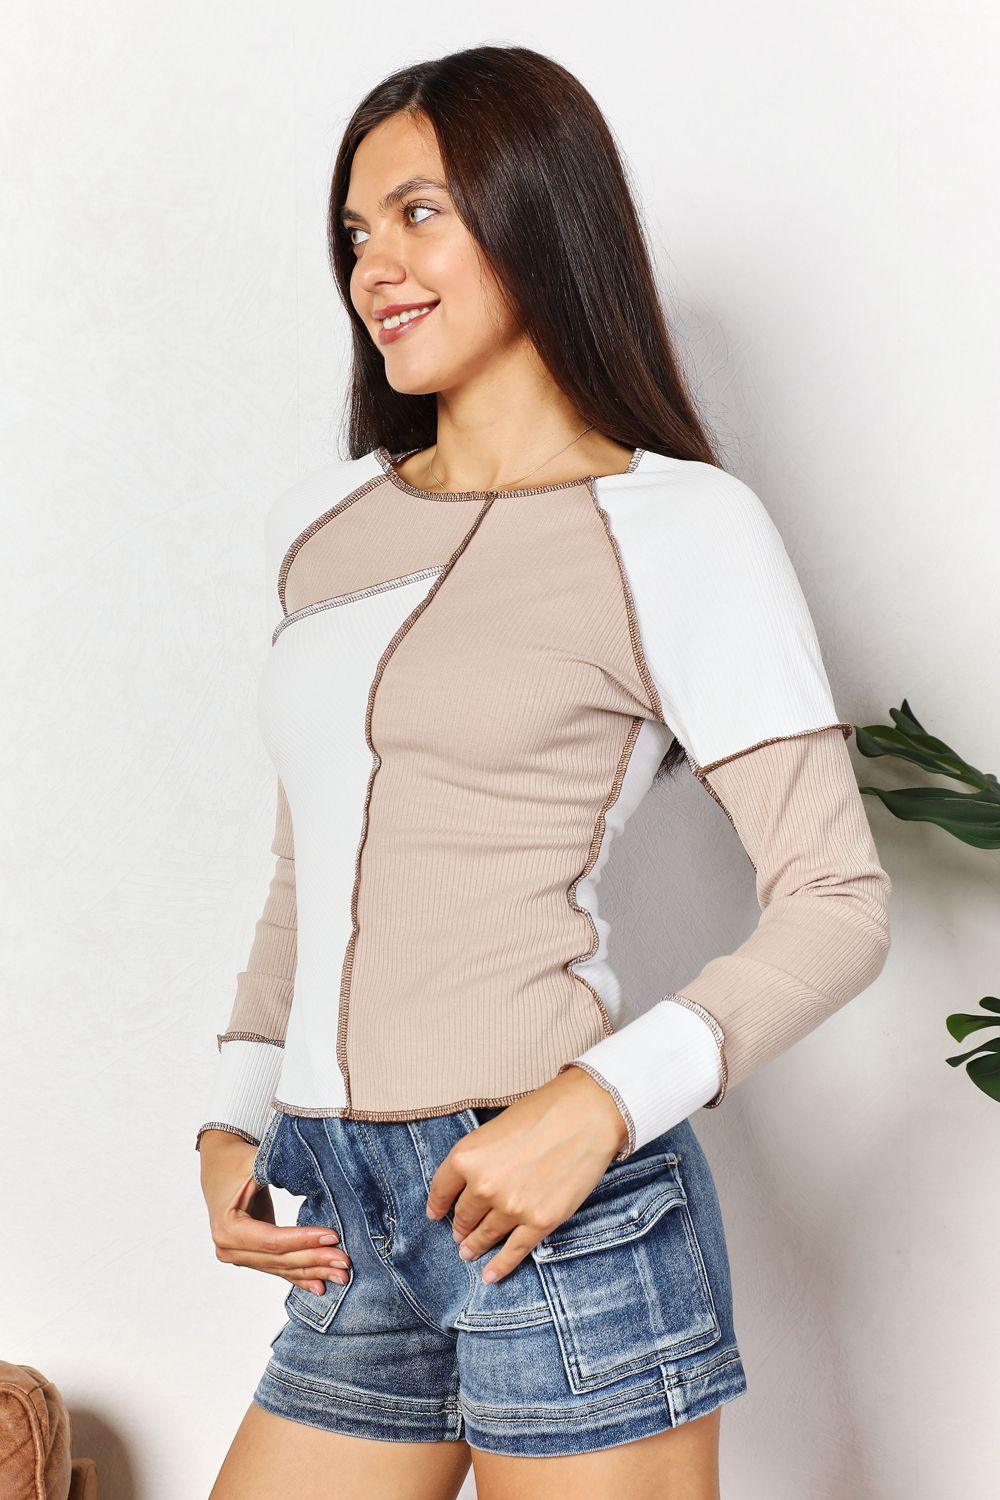 Double Take Color Block Exposed Seam Top - Lab Fashion, Home & Health